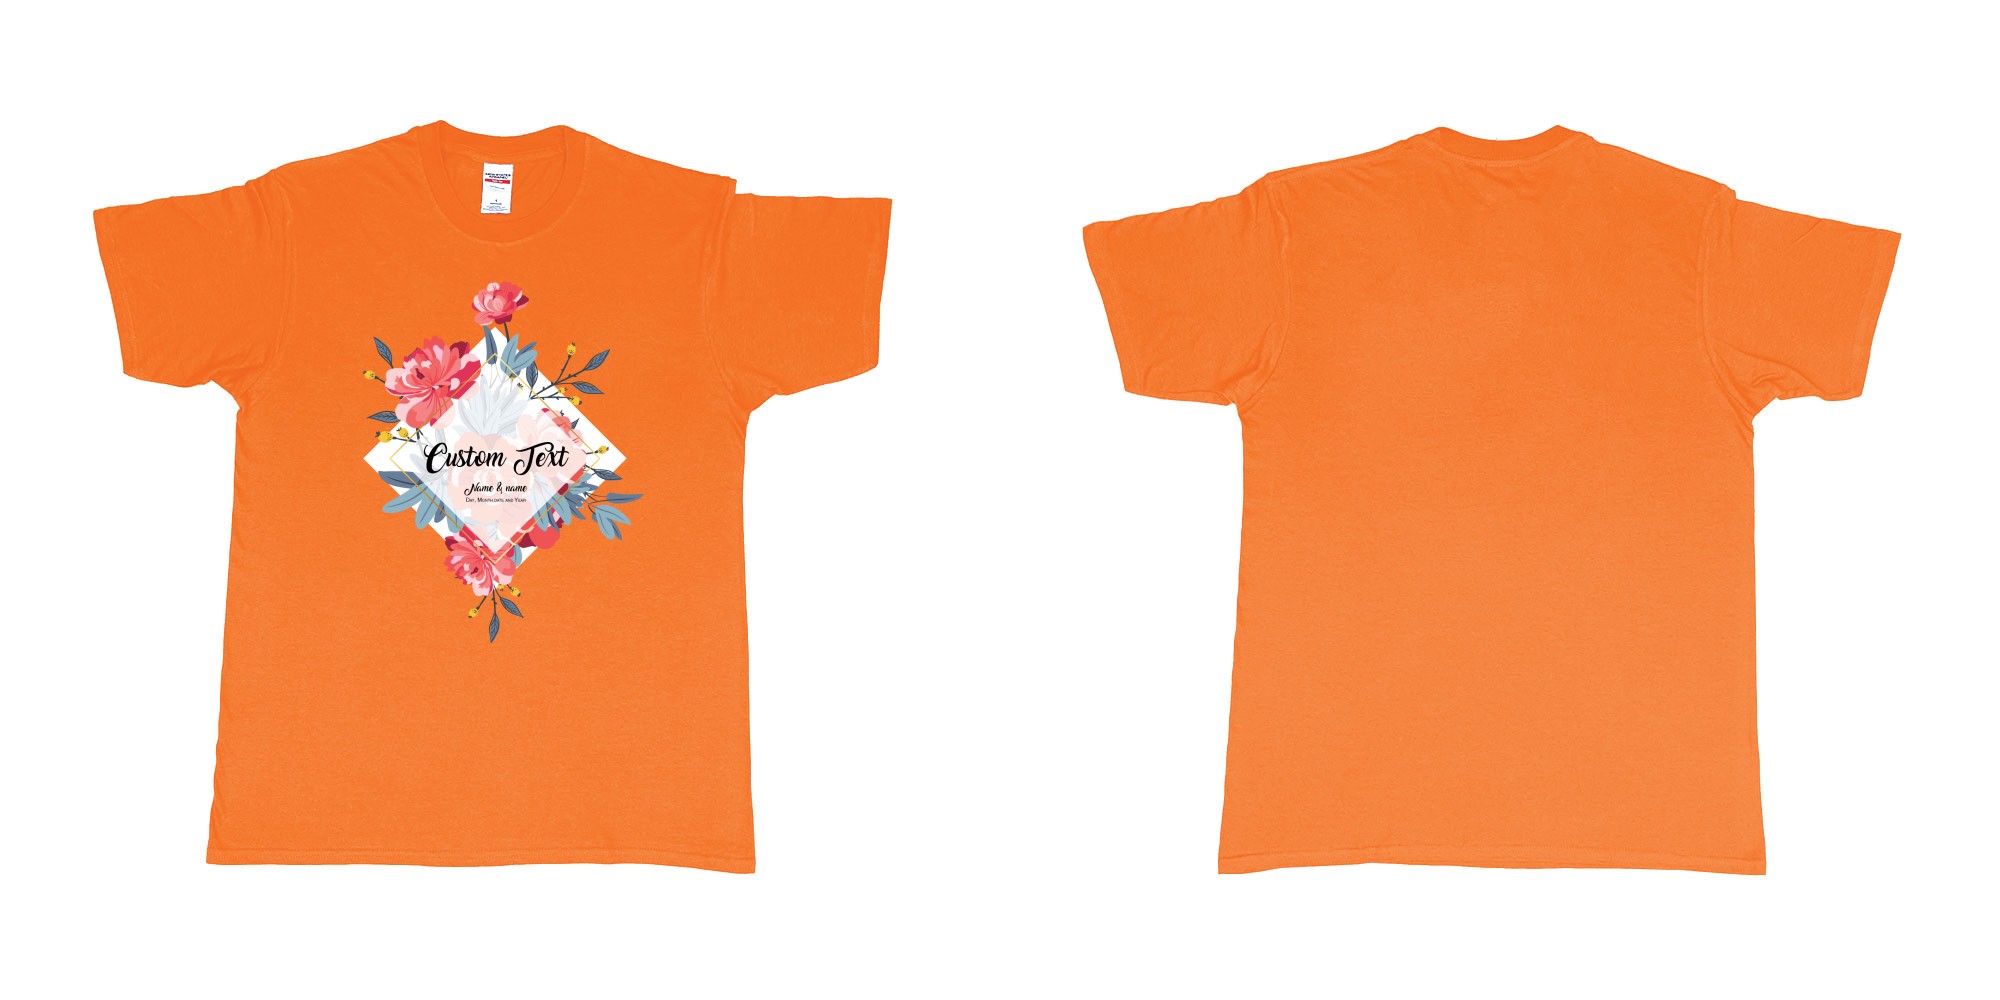 Custom tshirt design flower bouquet custom text in fabric color orange choice your own text made in Bali by The Pirate Way